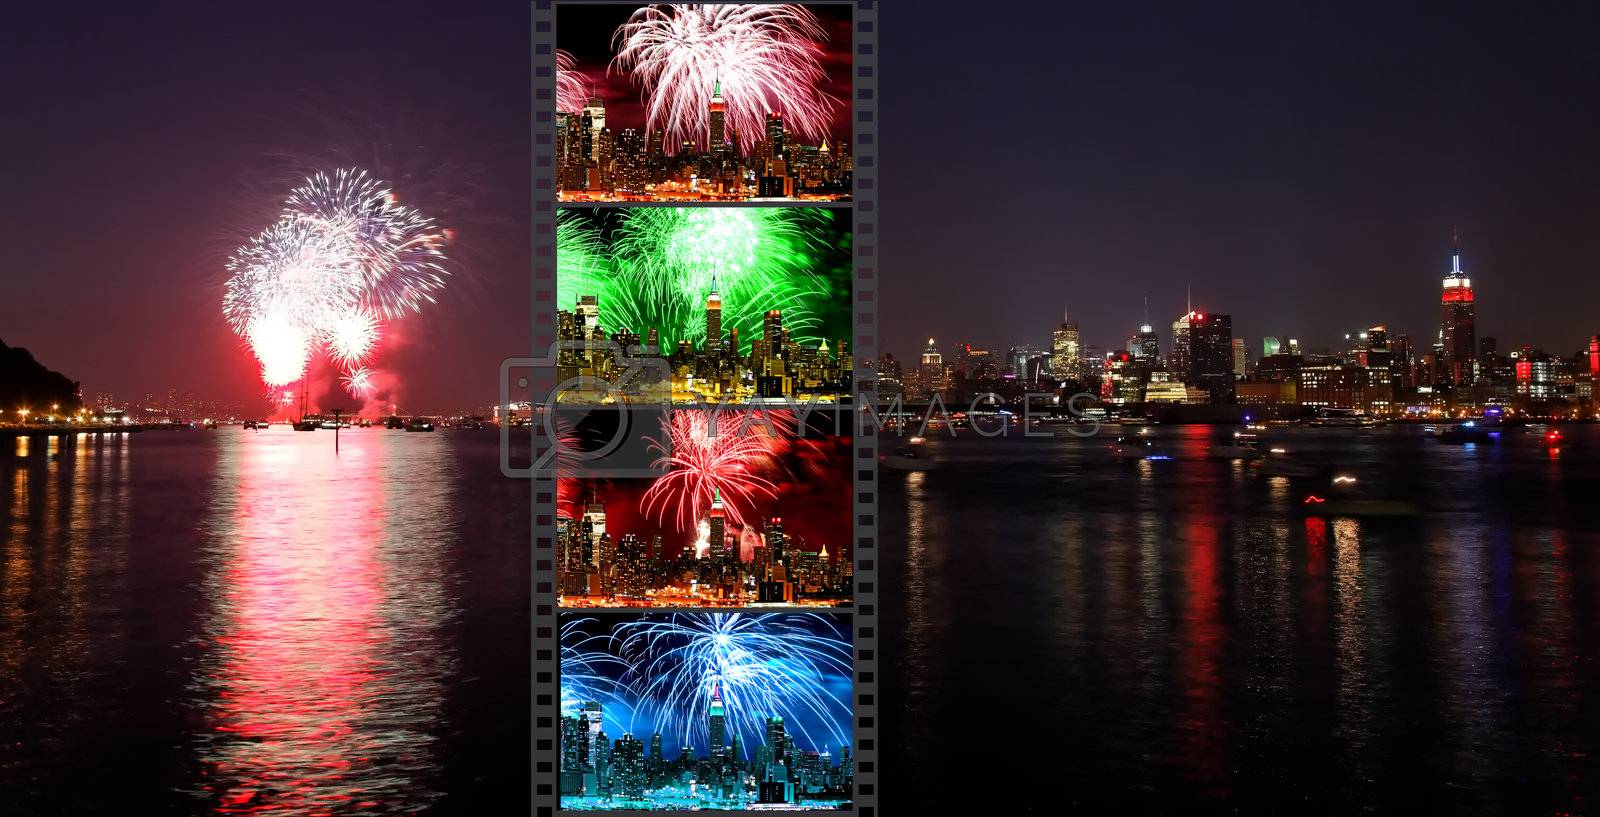 Royalty free image of  the Macy's 4th of July fireworks displays by gary718